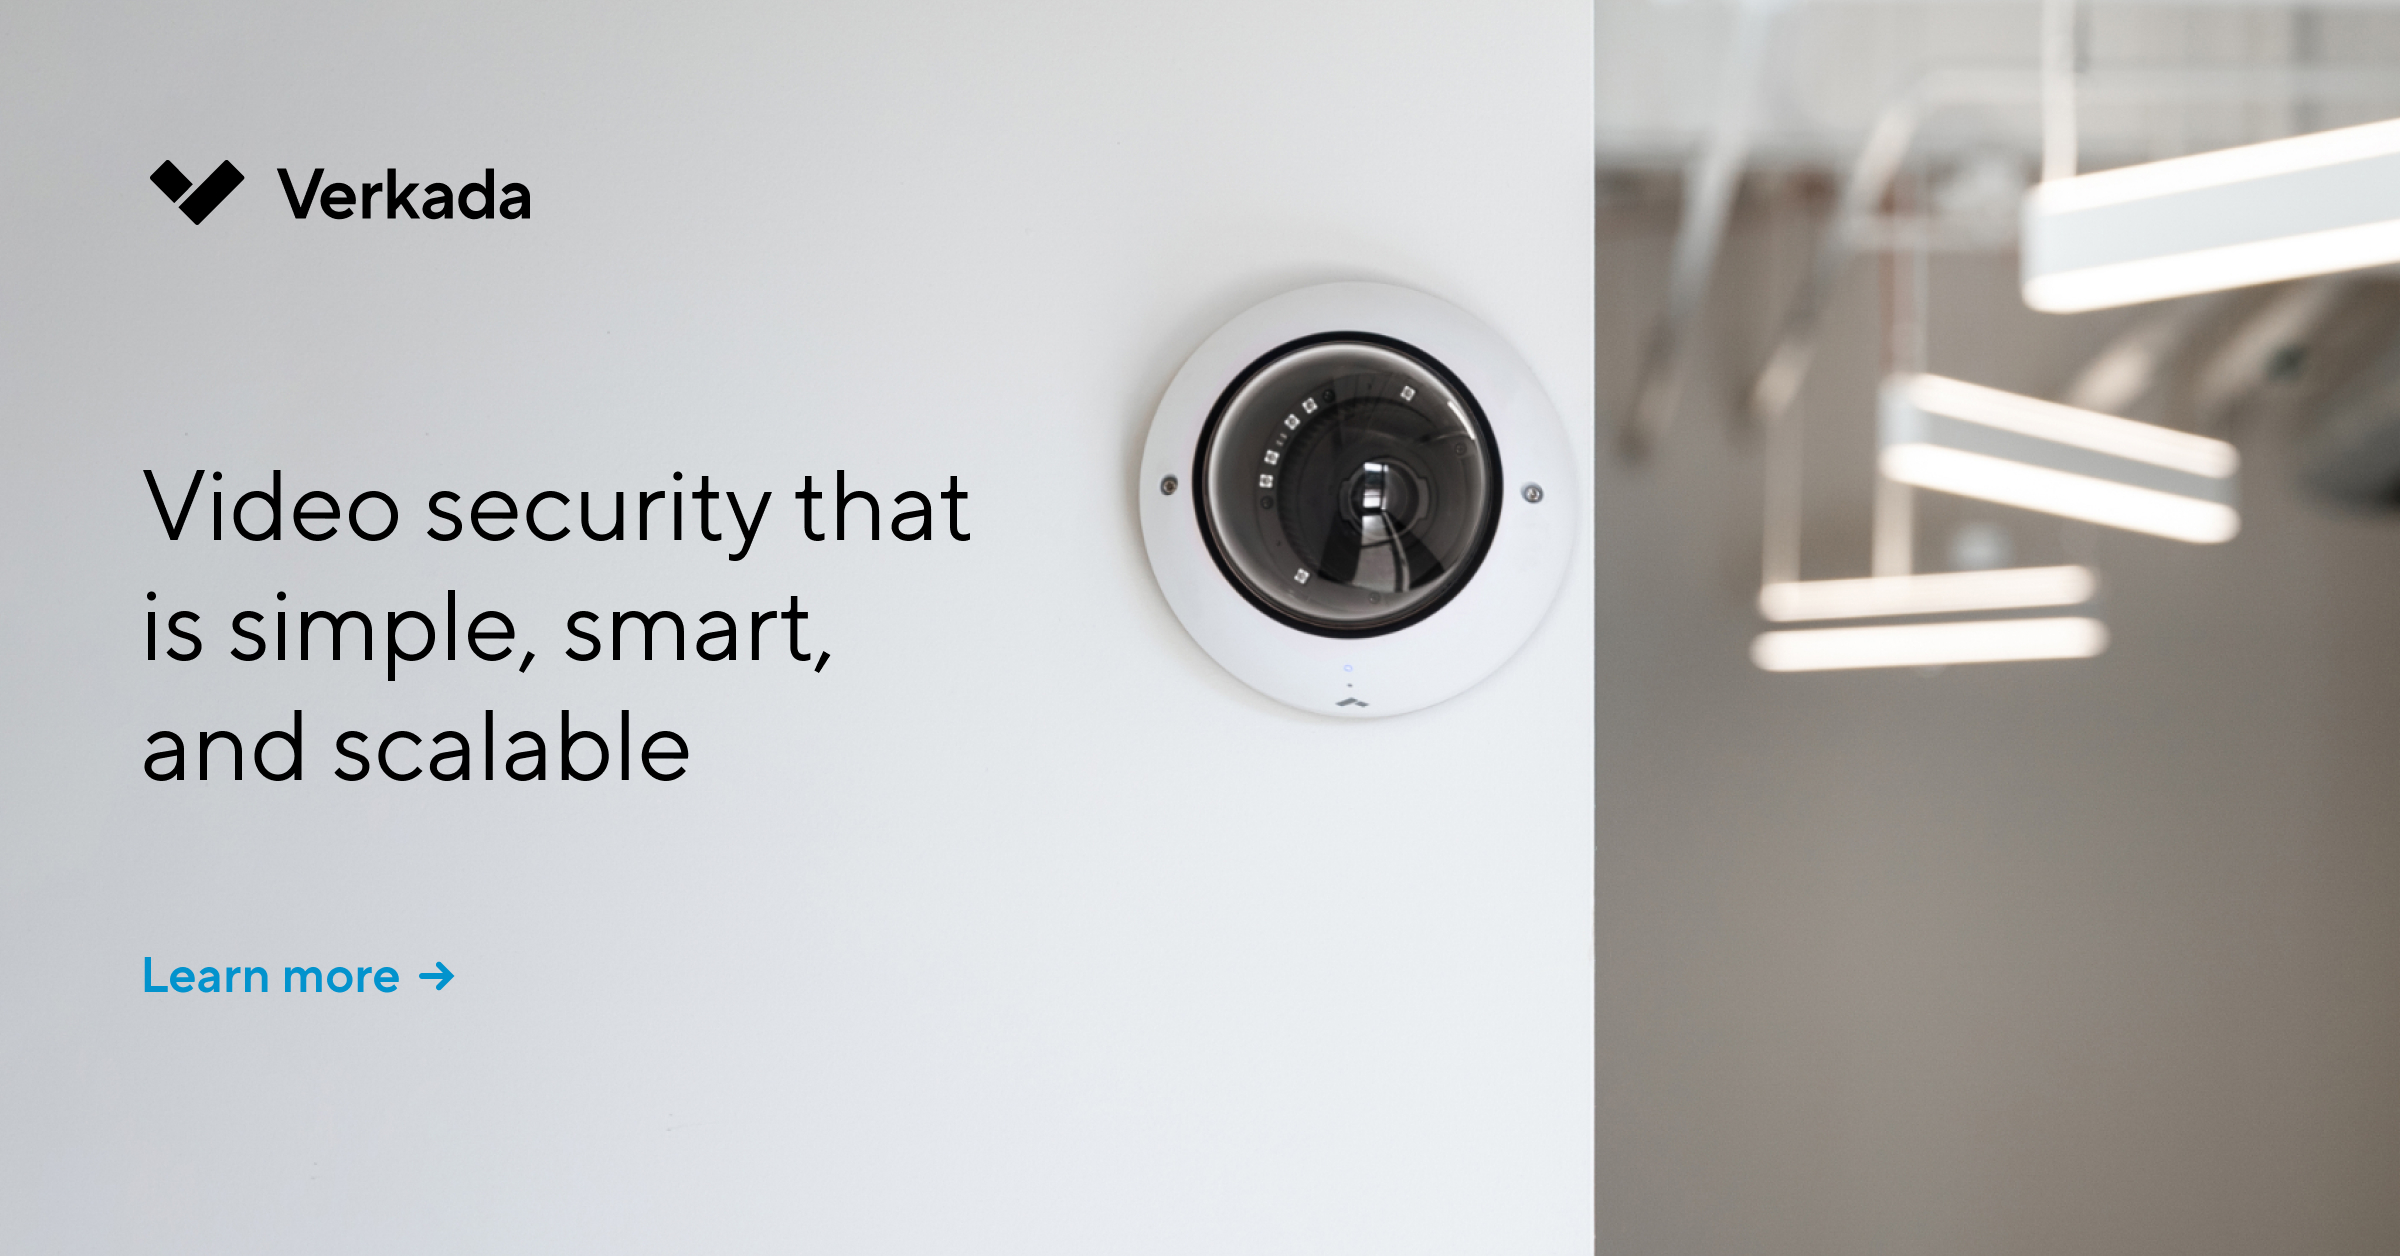 Video security that is simple, smart, and scalable